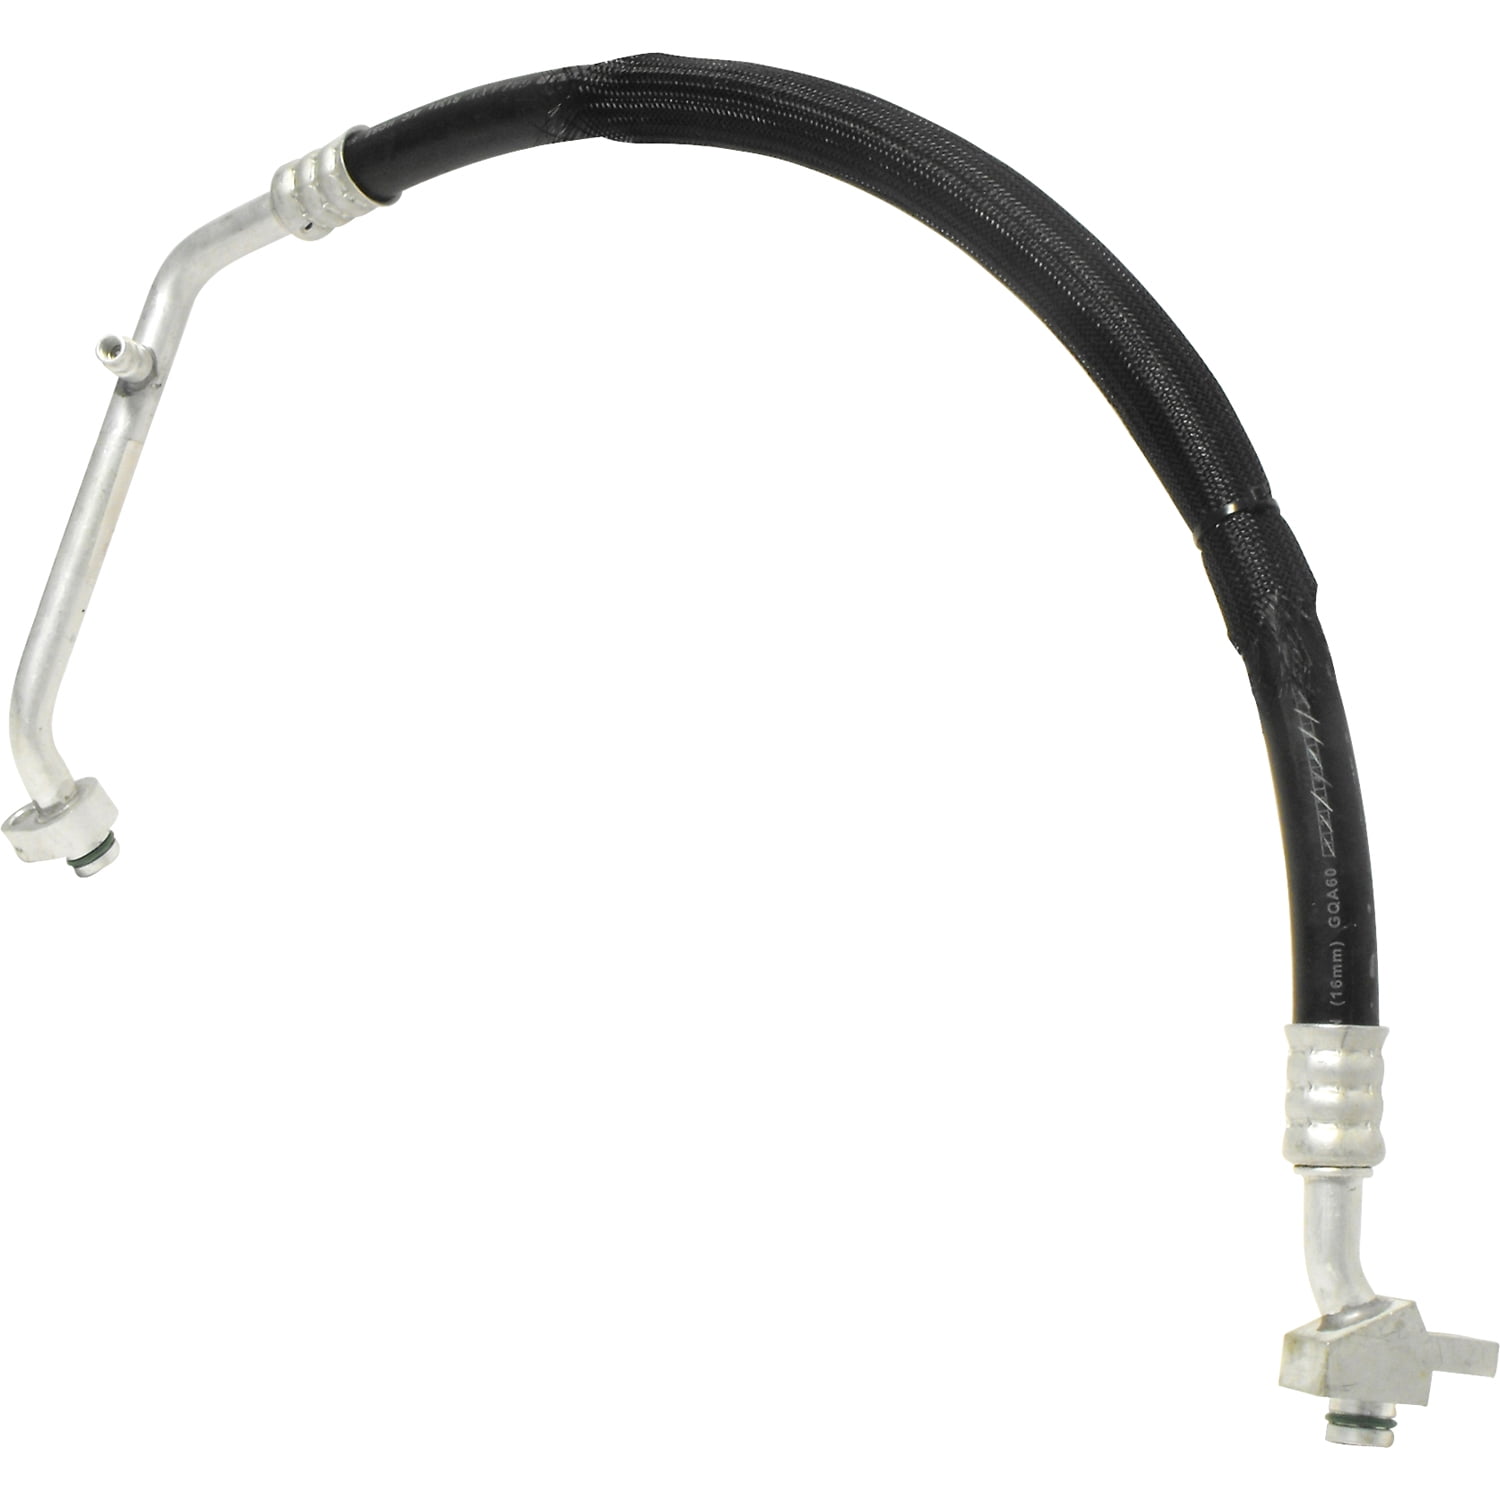 New A//C Suction Line Hose Assembly for Grand Caravan Town /& Country Caravan